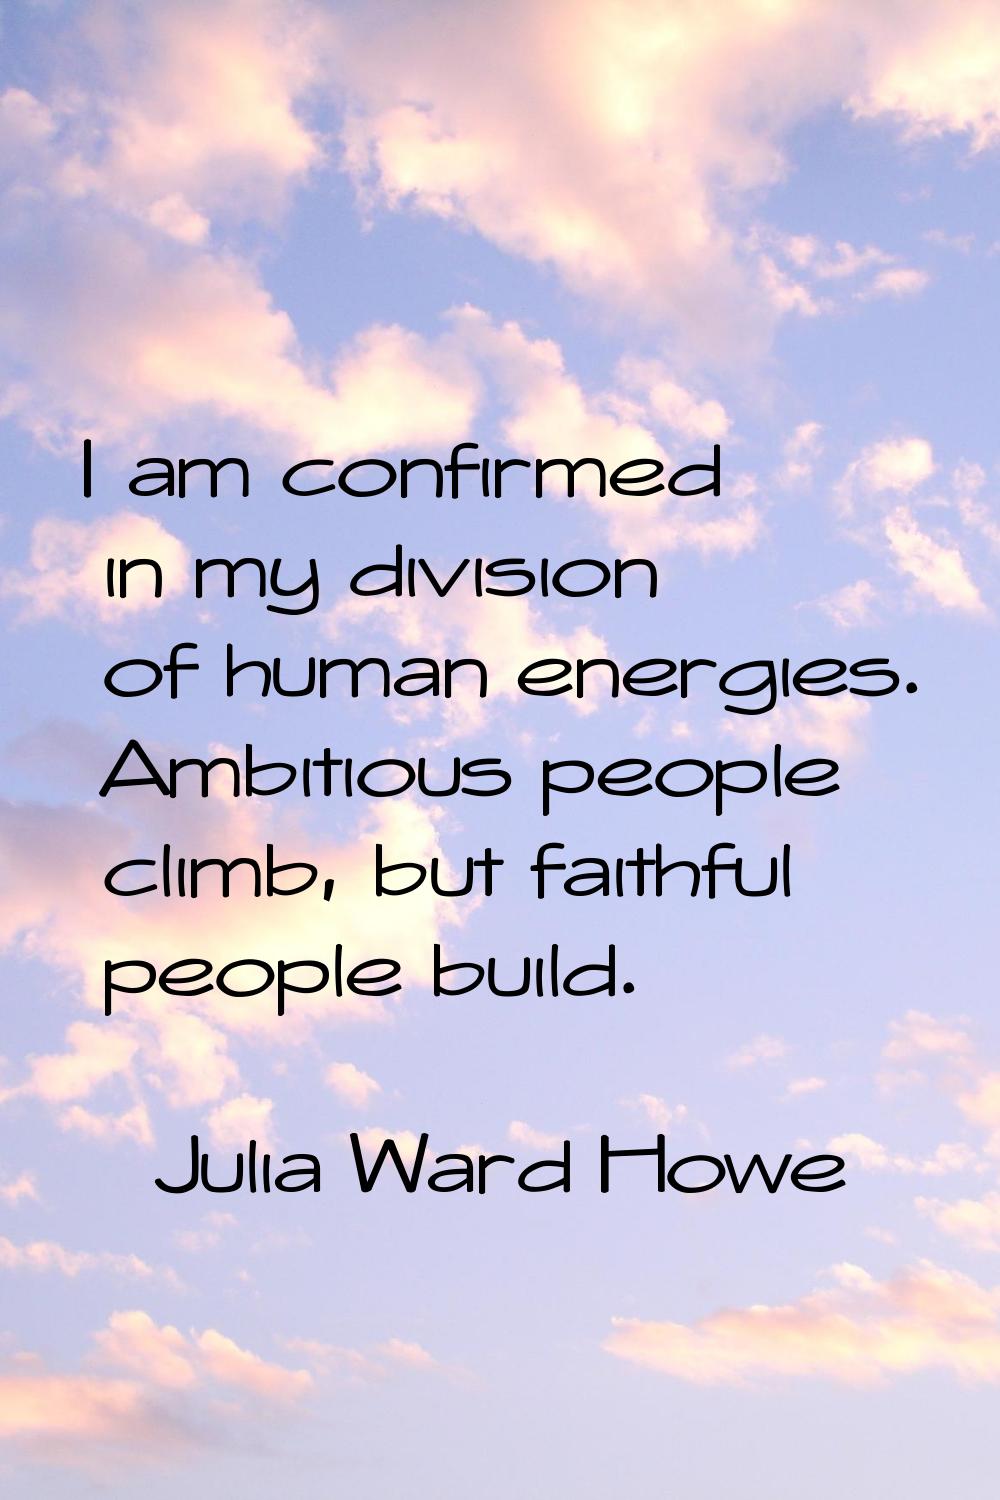 I am confirmed in my division of human energies. Ambitious people climb, but faithful people build.